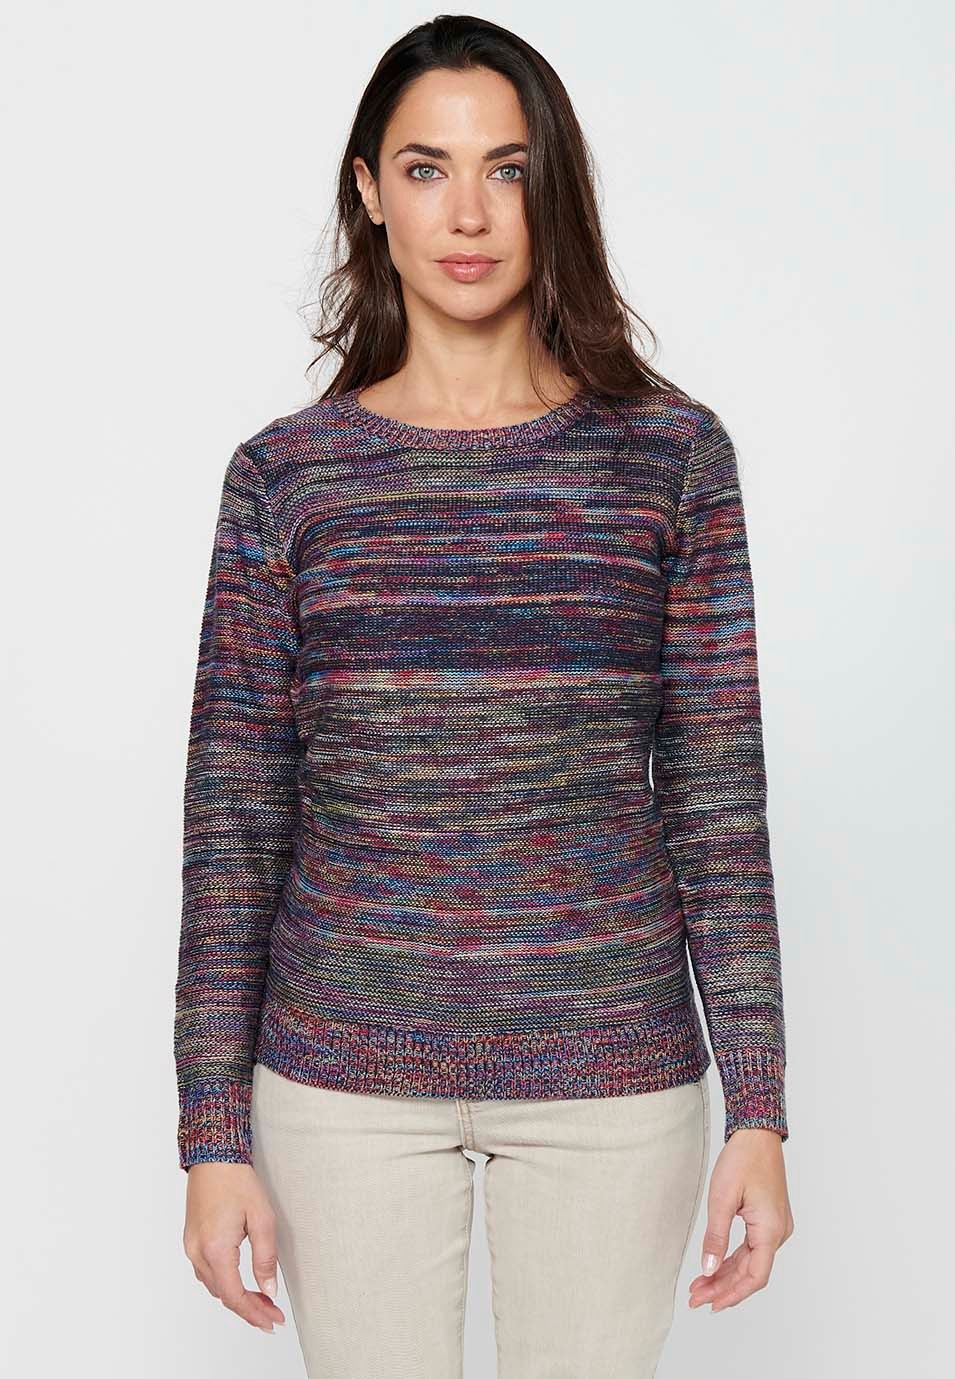 Women's Multicolor Round Neck Long Sleeve Sweater 2